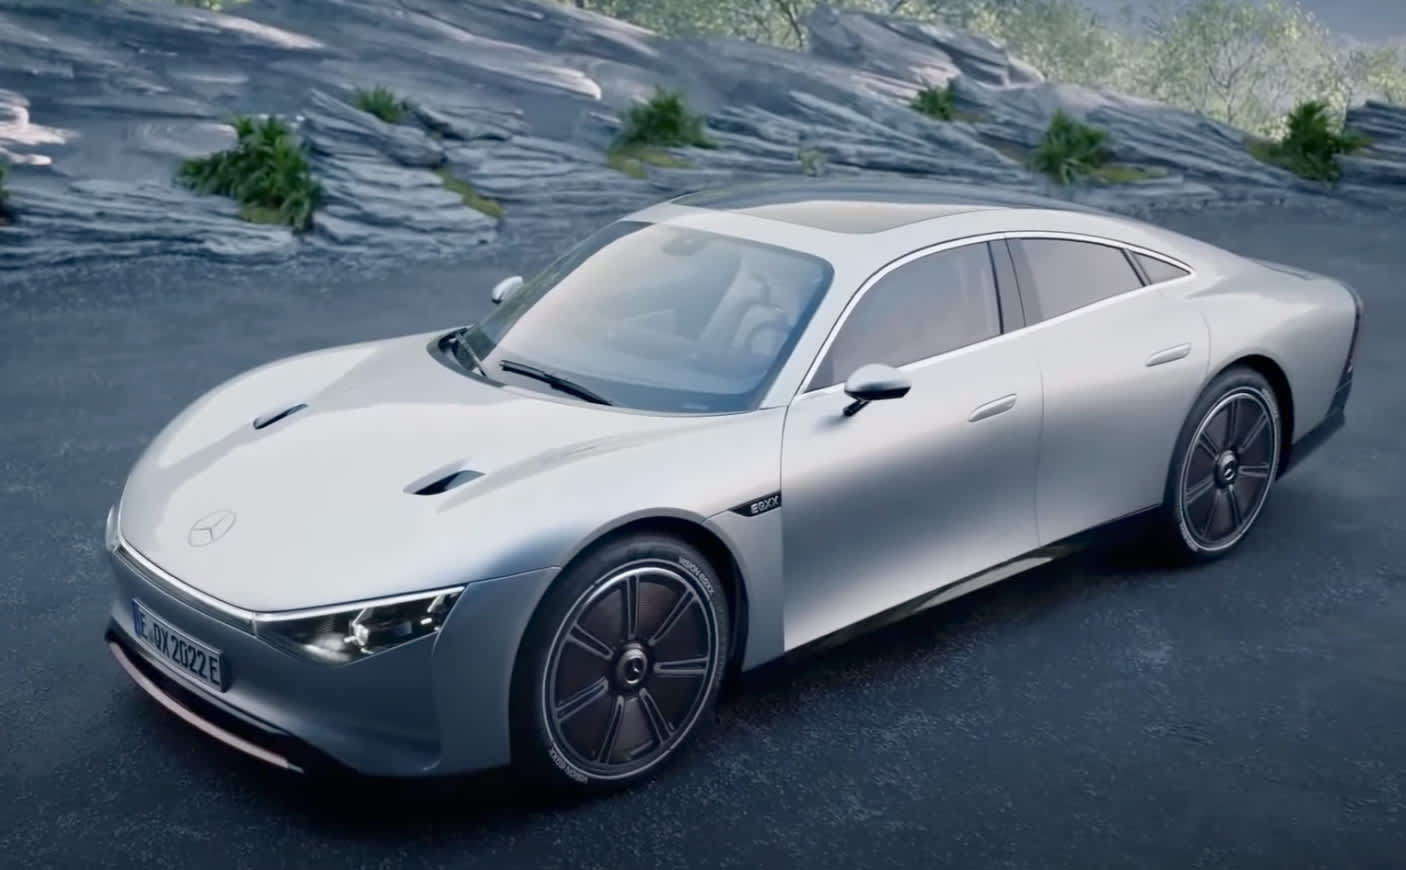 Daimler’s concept car uses bio-based materials, has solar tech on roof